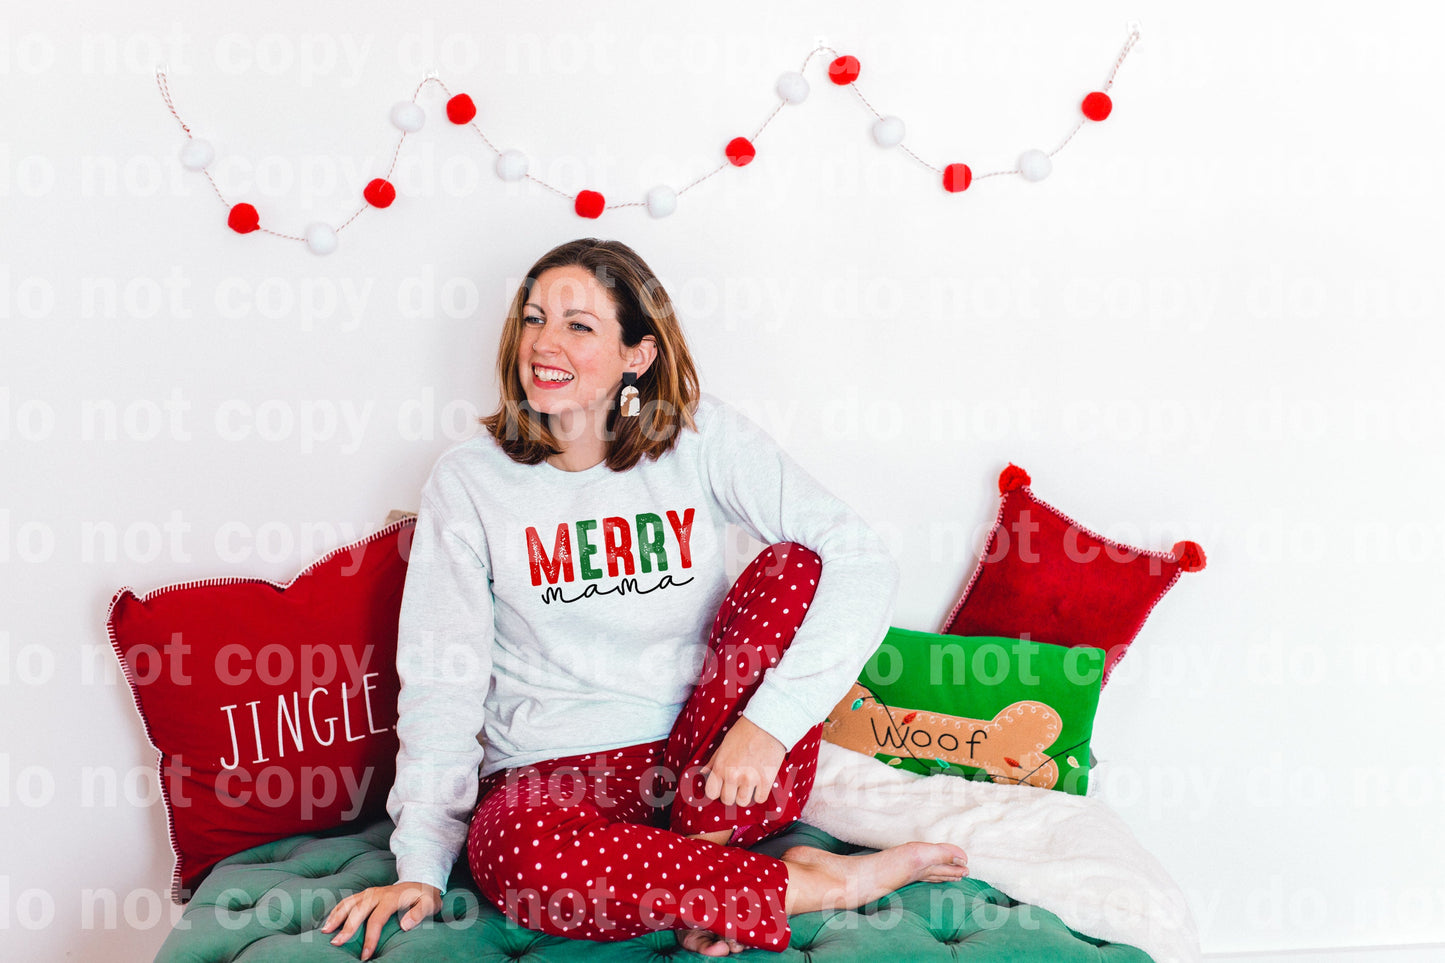 Merry Mama Distressed Full Color/One Color Dream Print or Sublimation Print